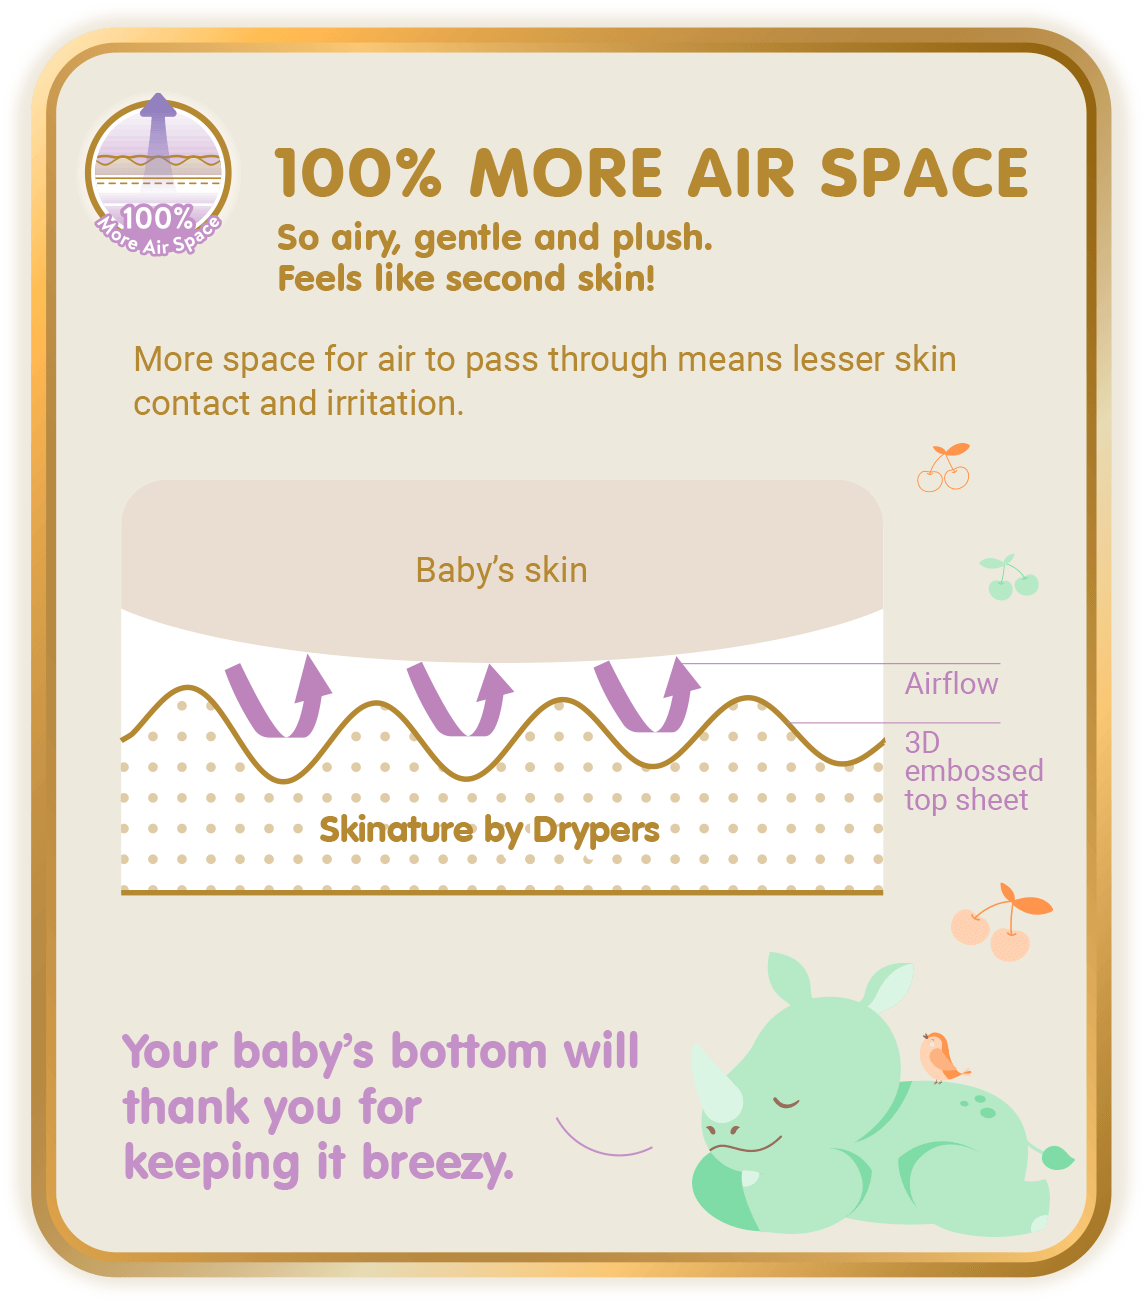 100% More Air Space, So airy, gentle and plush. Feels like second skin!: More space for air to pass through means lesser skin contact and irritation.